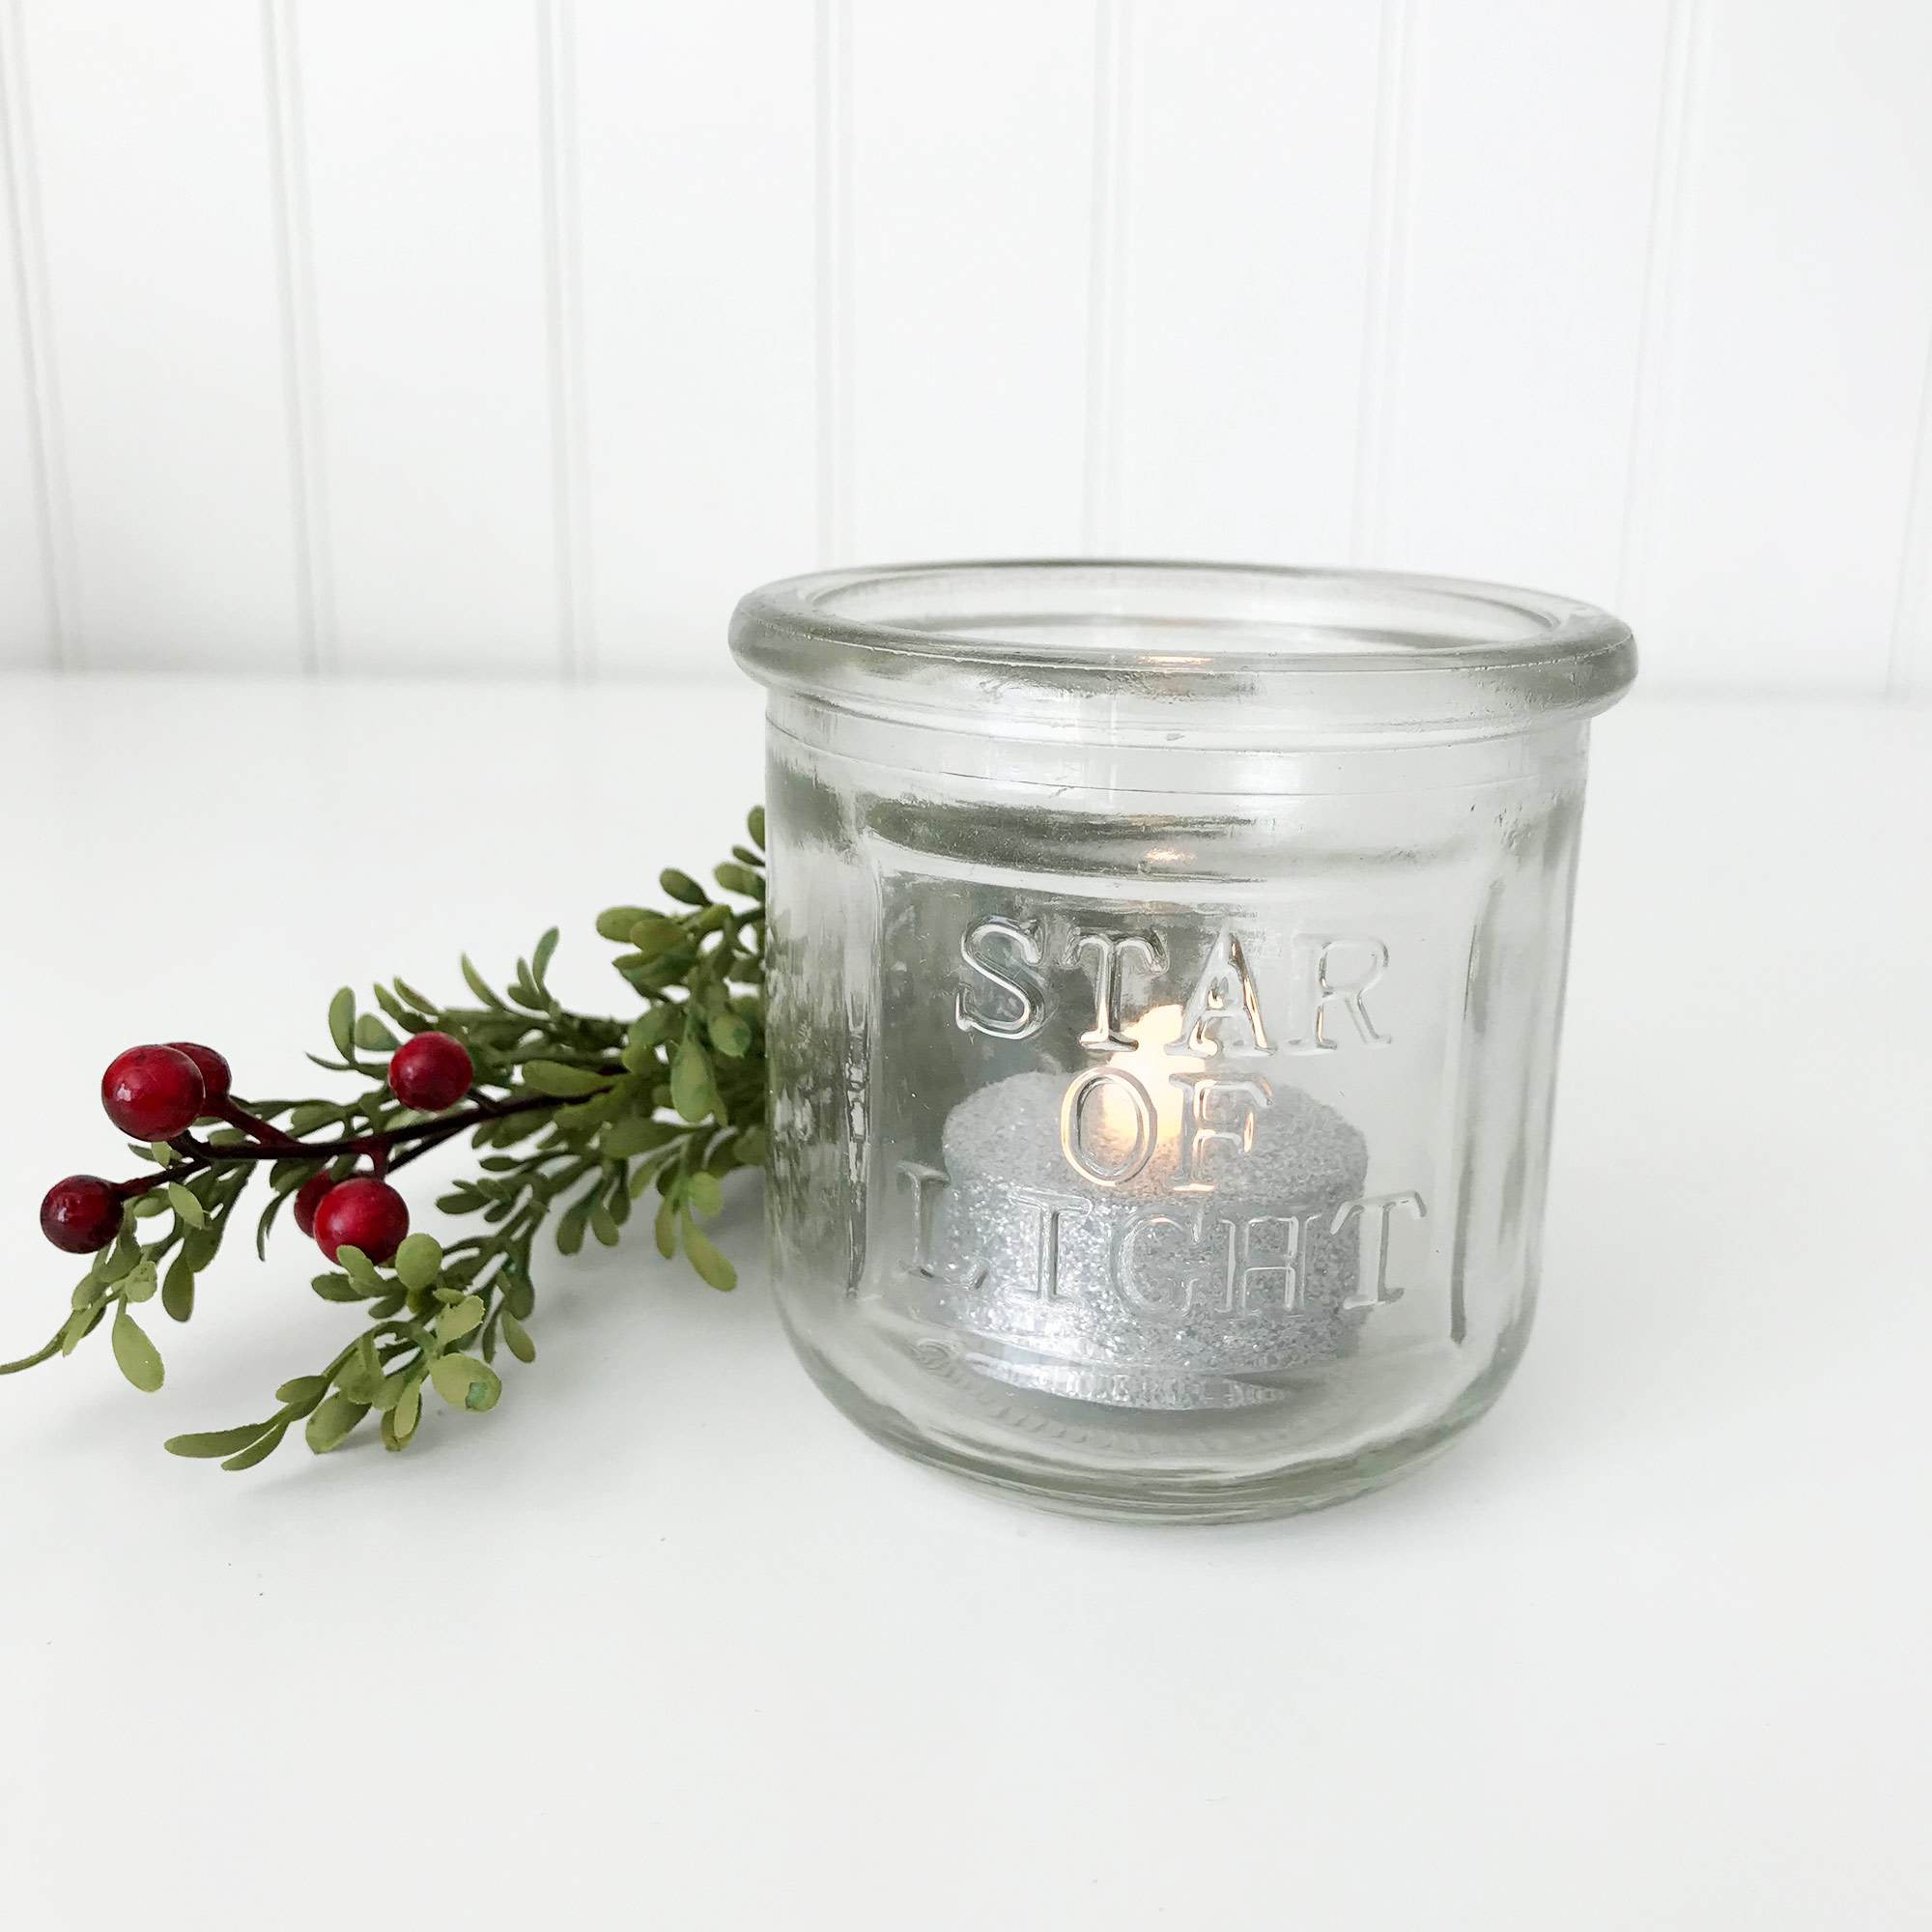 Star of Light Candle Jar -Dollar Section